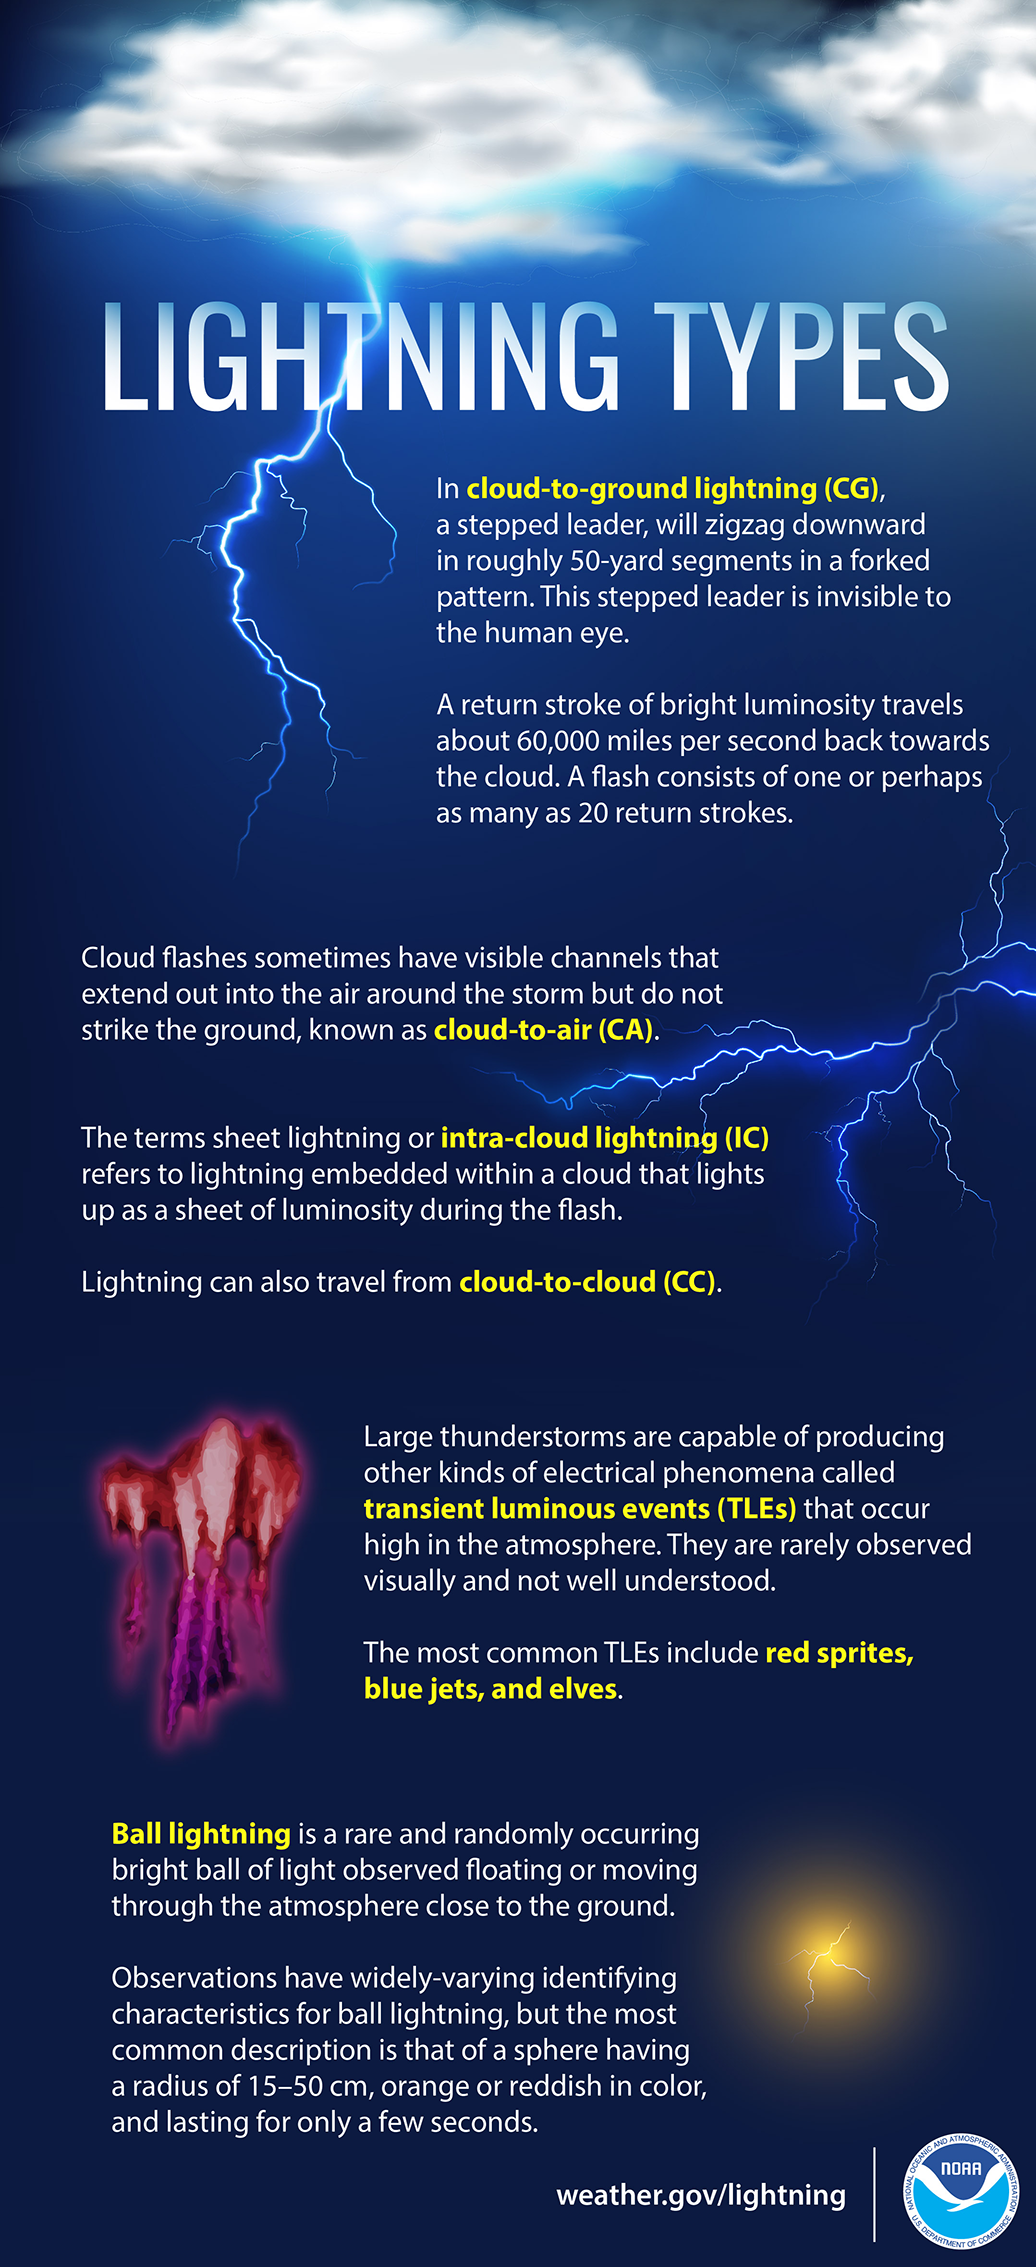 Lightning Types:
In cloud-to-ground lightning (CG), a stepped leader, will zigzag downward in roughly 50-yard segments in a forked pattern. This stepped leader is invisible to the human eye. 
A return stroke of bright luminosity travels about 60,000 miles per second back towards the cloud. A flash consists of one or perhaps as many as 20 return strokes.
Cloud flashes sometimes have visible channels that extend out into the air around the storm but do not strike the ground, known as cloud-to-air (CA).
The terms sheet lightning or intra-cloud lightning (IC) refers to lightning embedded within a cloud that lights up as a sheet of luminosity during the flash. 
Lightning can also travel from cloud-to-cloud (CC).
Large thunderstorms are capable of producing other kinds of electrical phenomena called transient luminous events (TLEs) that occur high in the atmosphere. They are rarely observed visually and not well understood. 
The most common TLEs include red sprites, blue jets, and elves.
Ball lightning is a rare and randomly occurring bright ball of light observed floating or moving through the atmosphere close to the ground.
Observations have widely varying identifying characteristics for ball lightning, but the most common description is that of a sphere having a radius of 15â€“50 cm, orange or reddish in color, and lasting for only a few seconds.